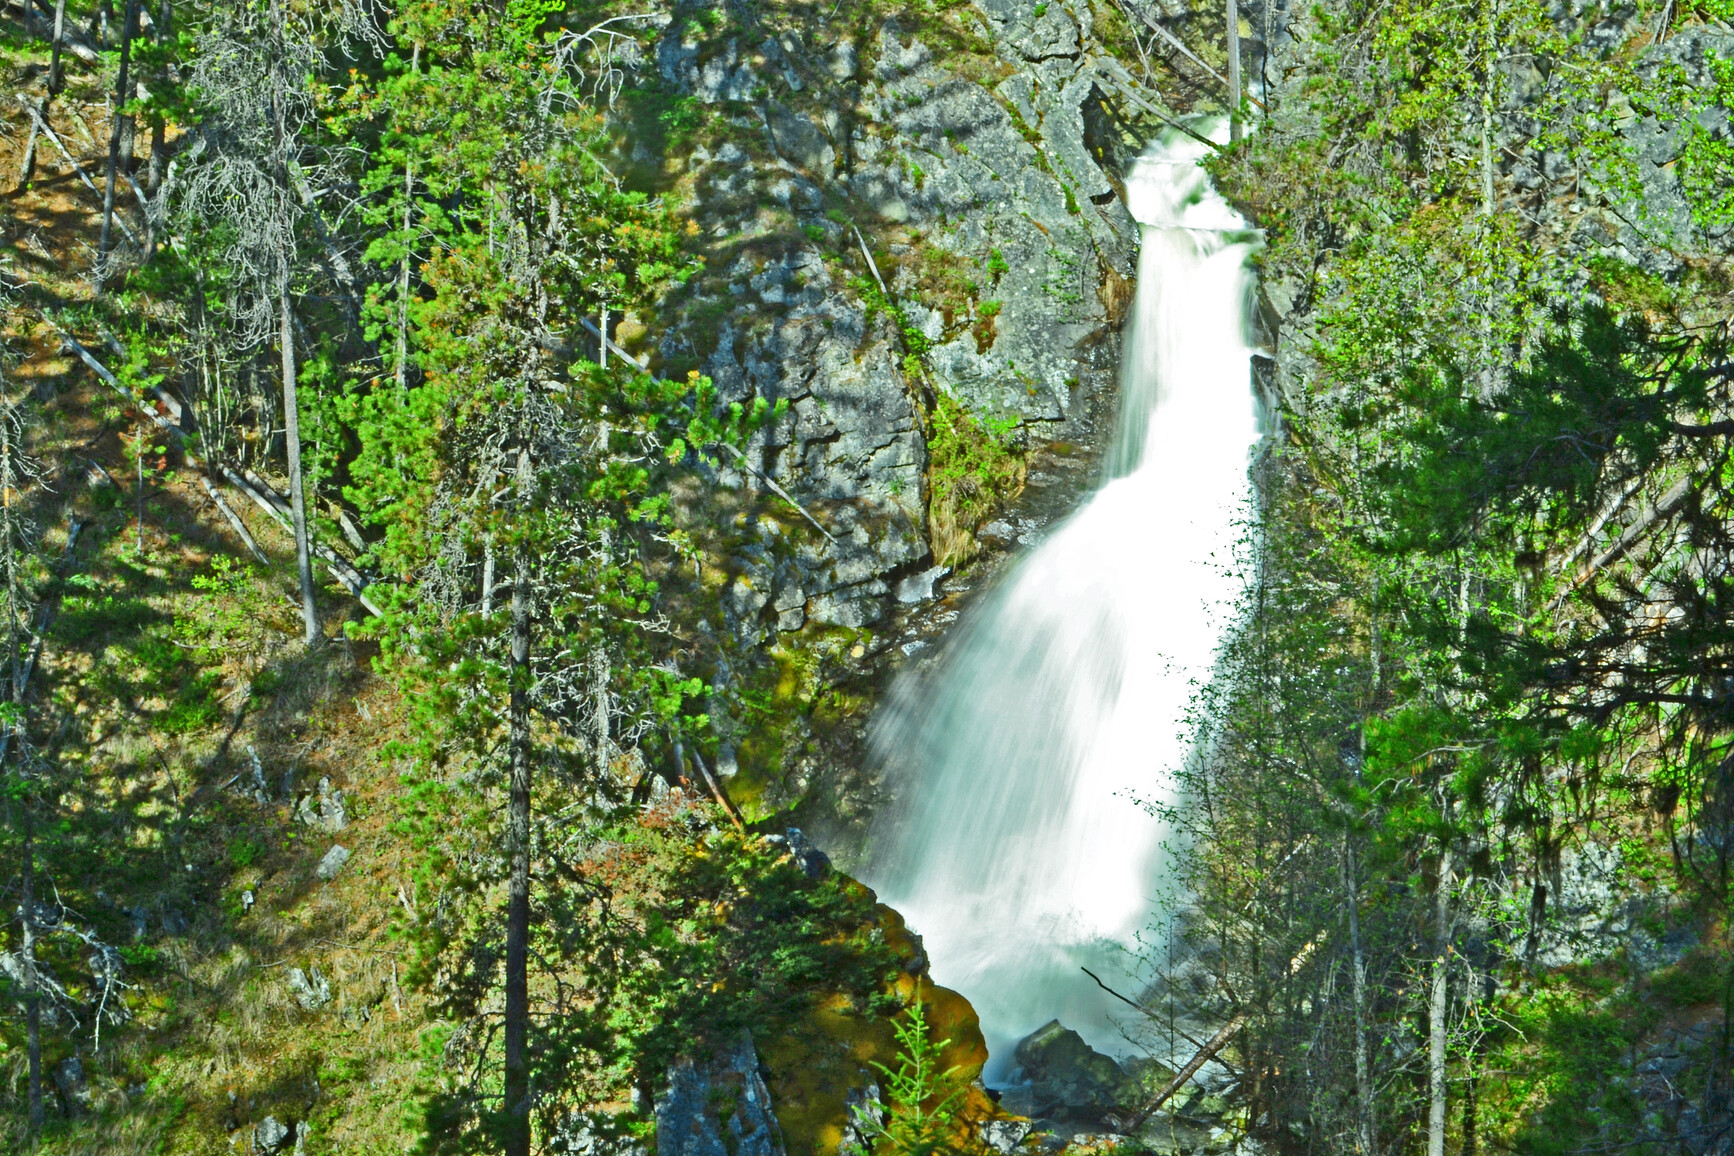 Photo of waterfall. Trees and large rocks covered in moss surround the waterfall.